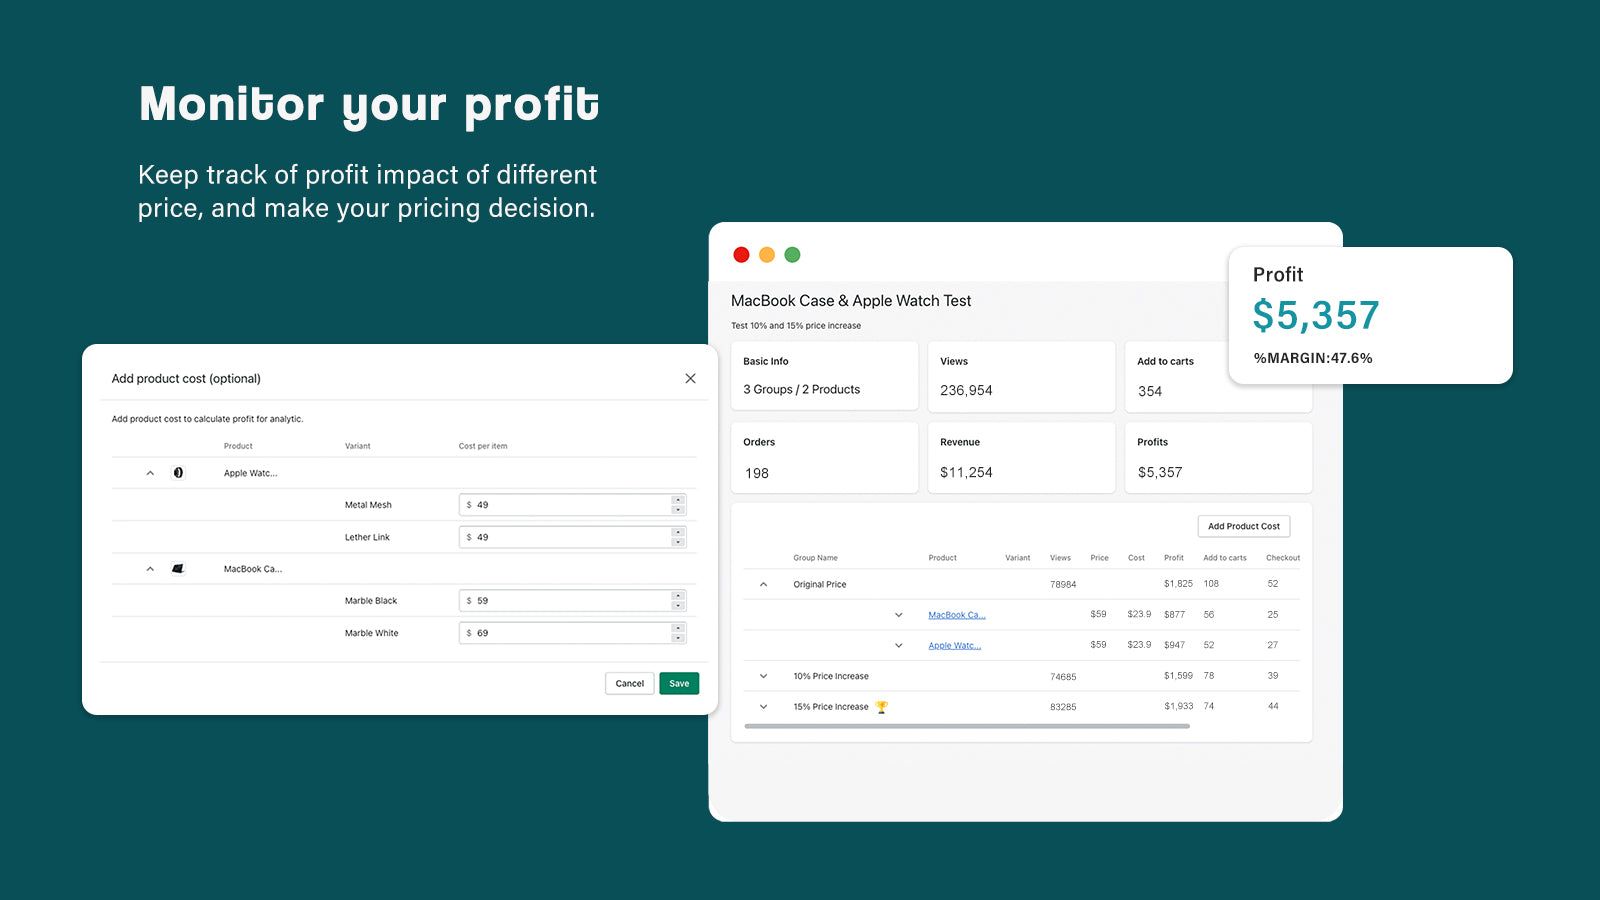 Monitor your a/b product price tests in real-time.